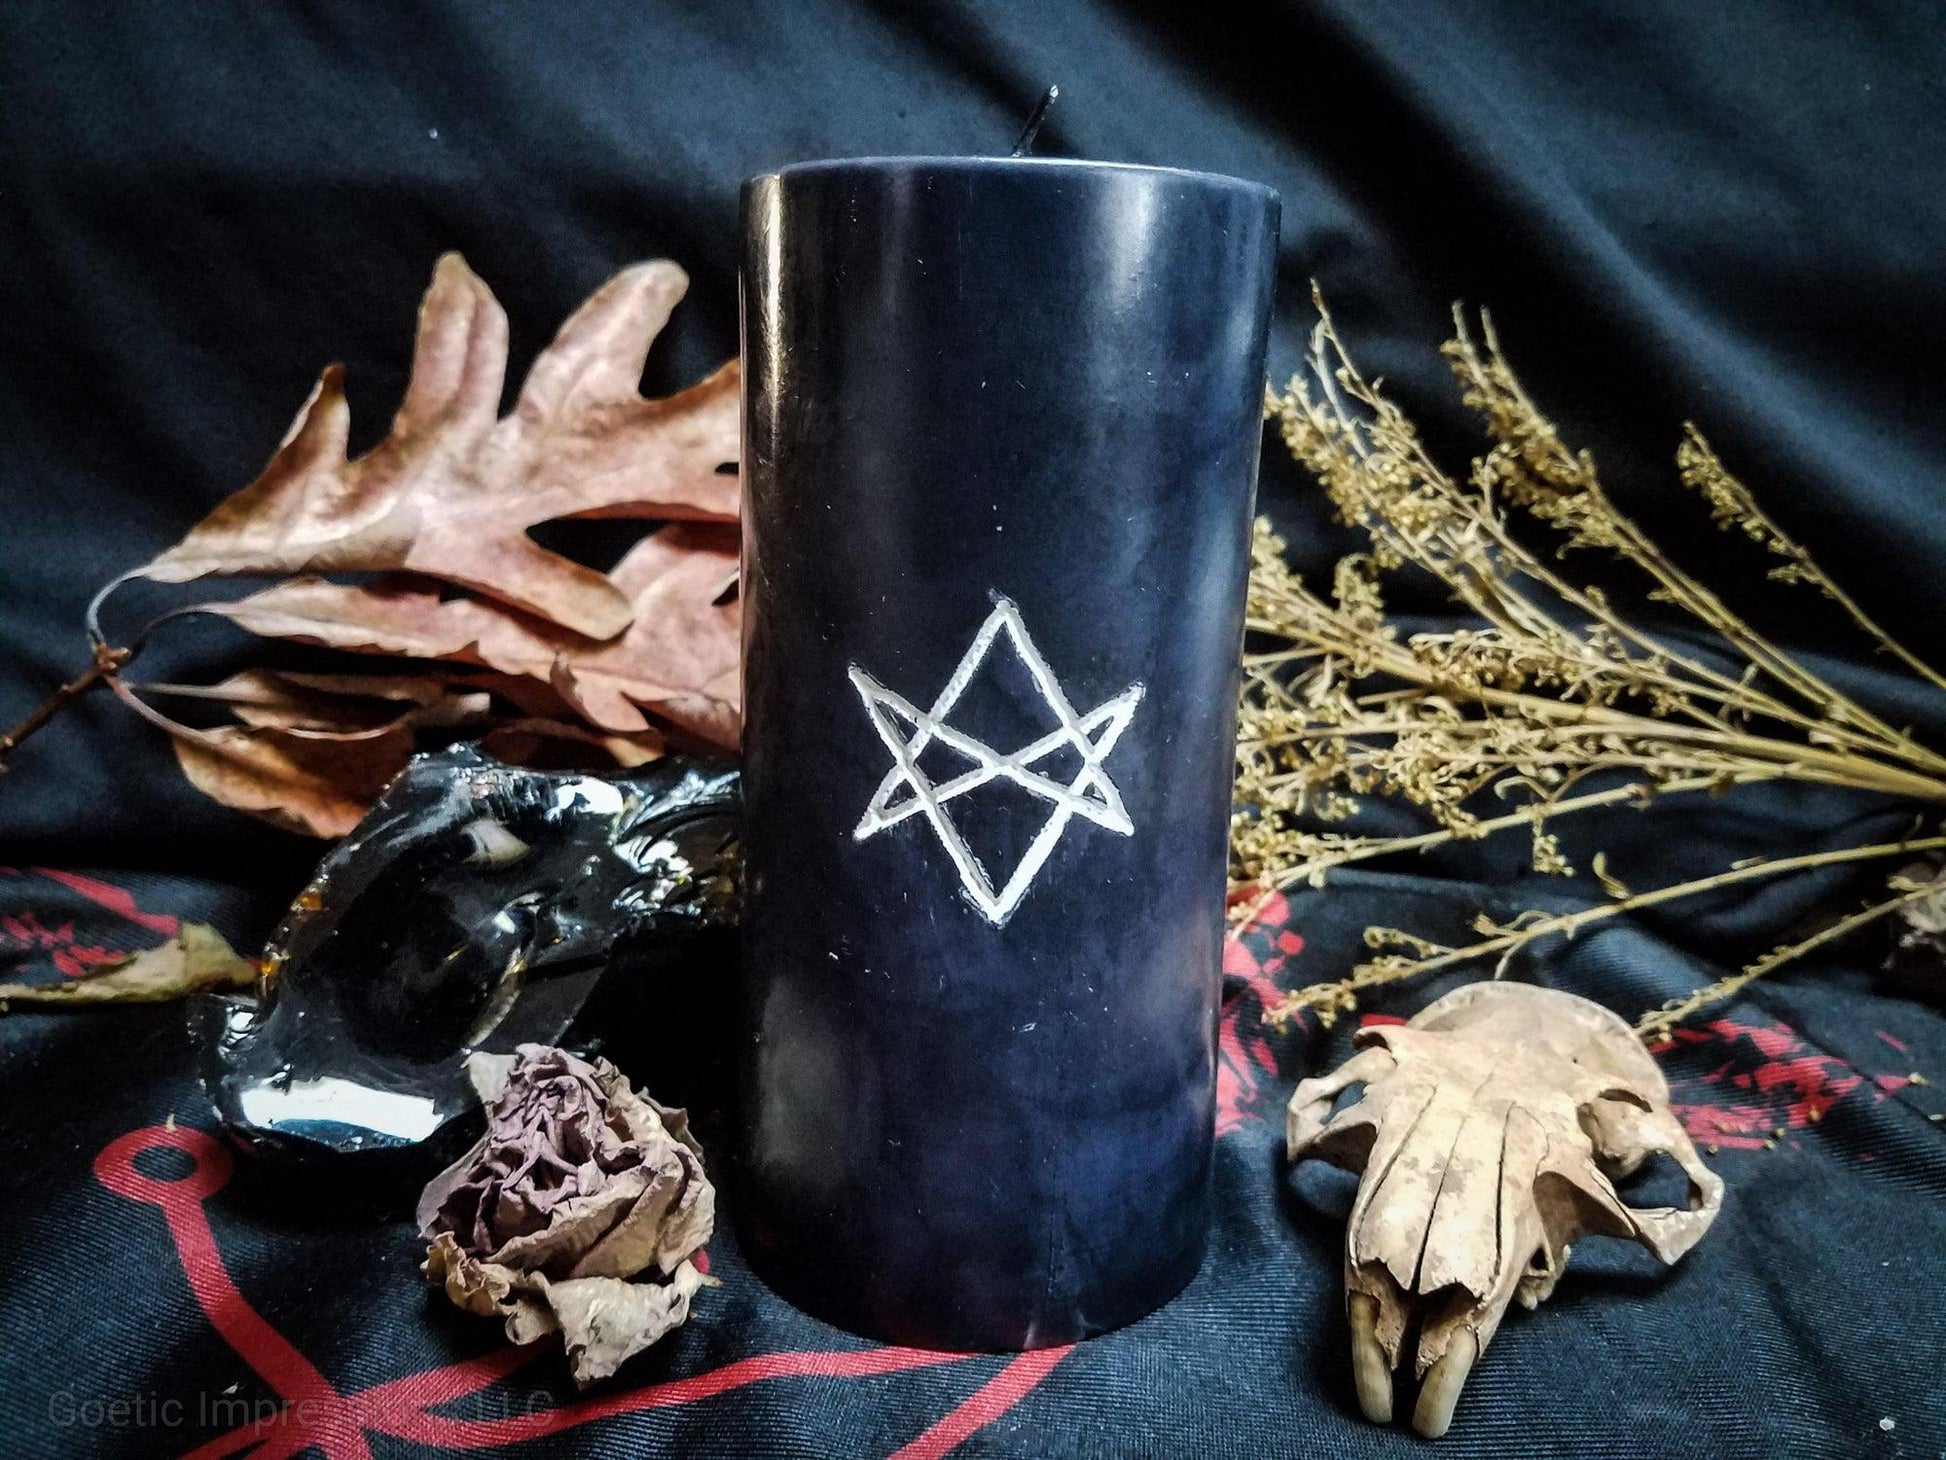 Black pillar candle with white unicursal hexagram sigil carved into it.